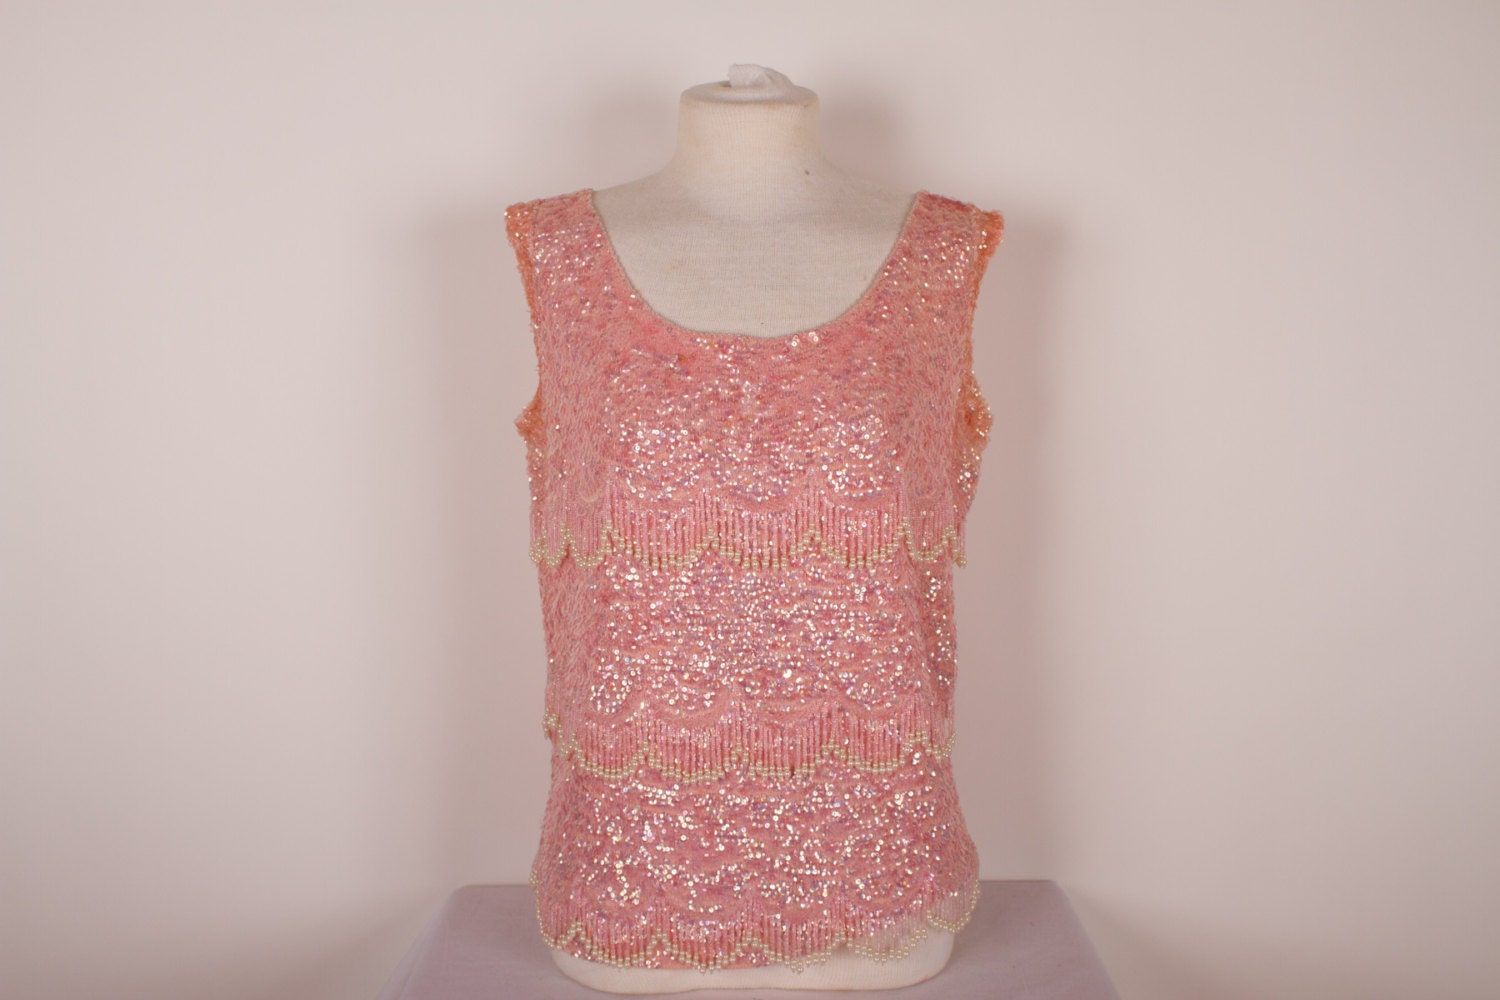 Vintage 1960s Beaded Top / 60s Pink Sequin and Pearl Beaded Sweater / Mad Men / L - ladyscarletts